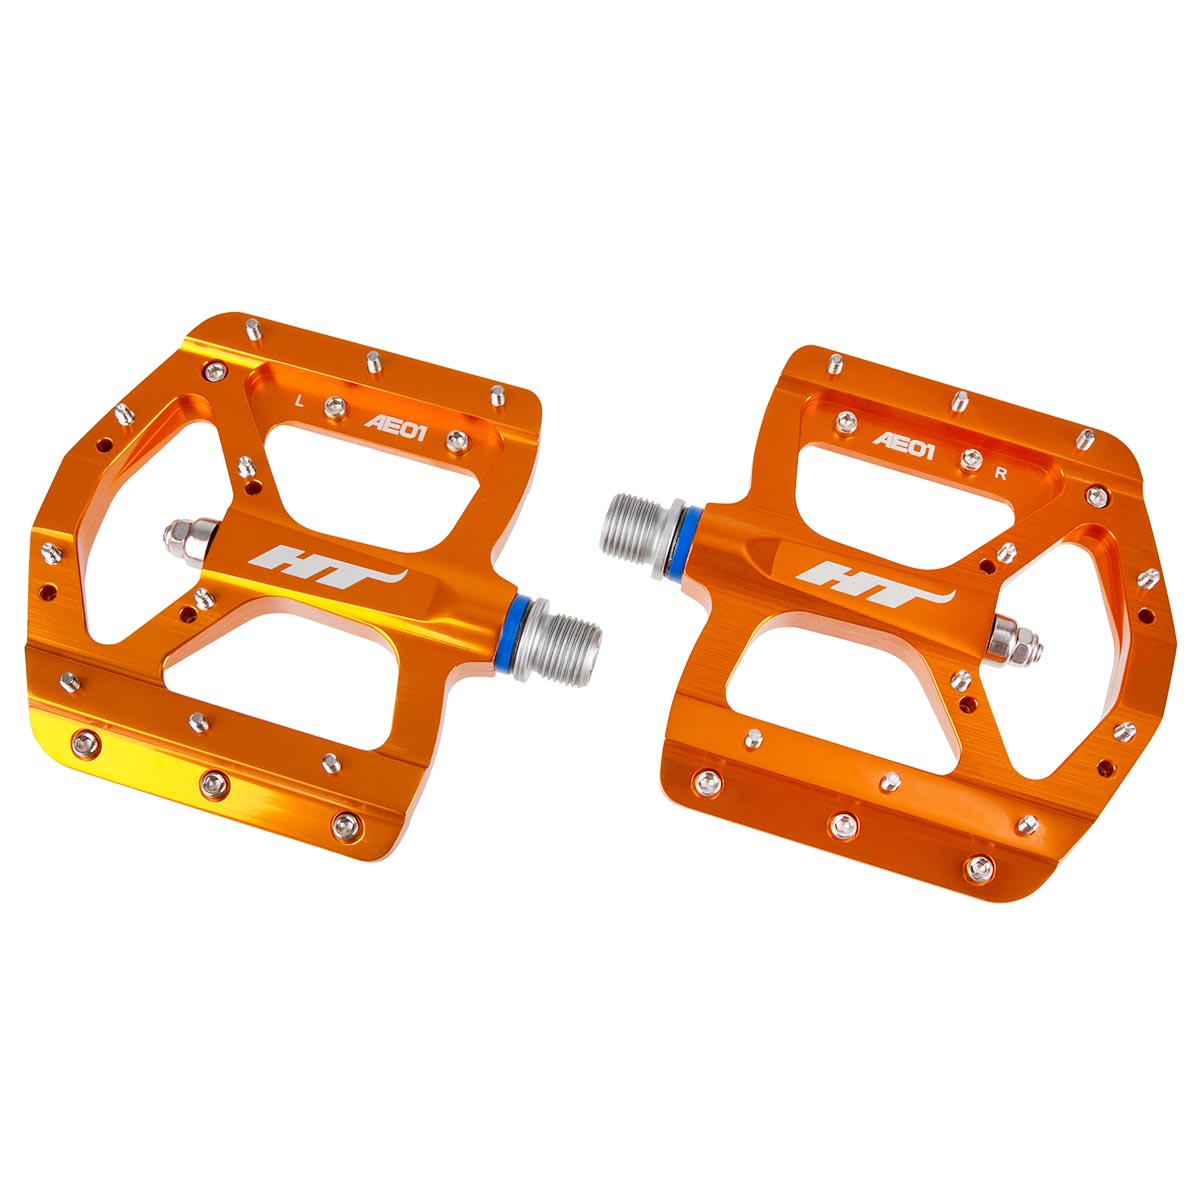 HT Components Pedals AE01 Orange